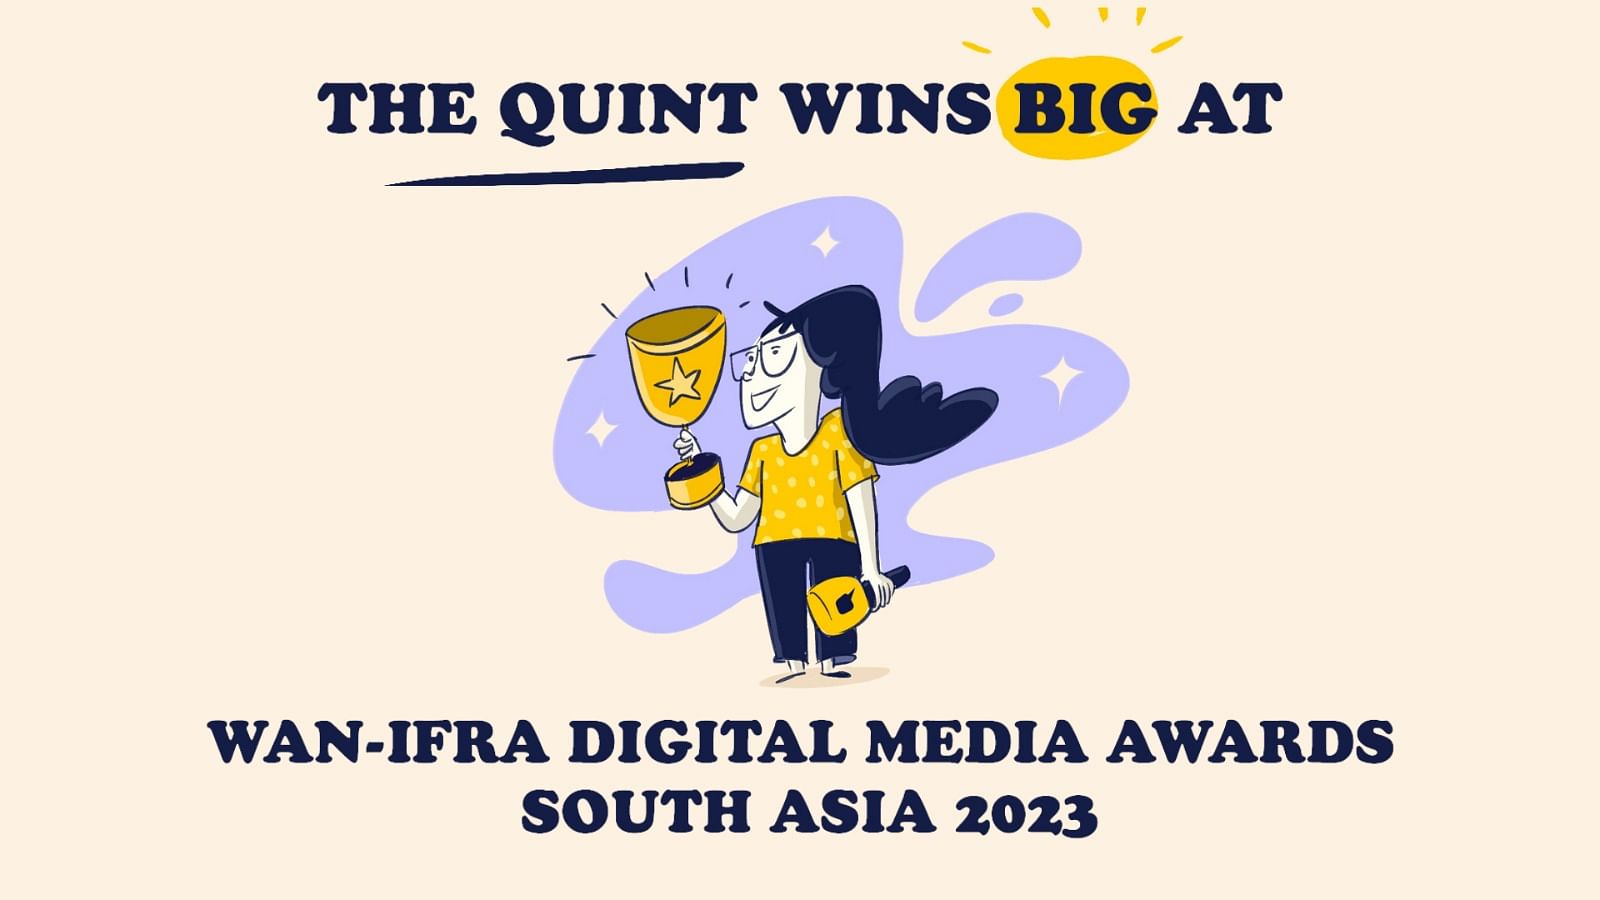 <div class="paragraphs"><p>We are delighted to announce that The Quint has won five awards across categories at the <strong>Digital Media Awards South Asia 2023 </strong>by World Association of News Publishers (WAN-IFRA), including the ‘Best News Website'.</p><p></p></div>